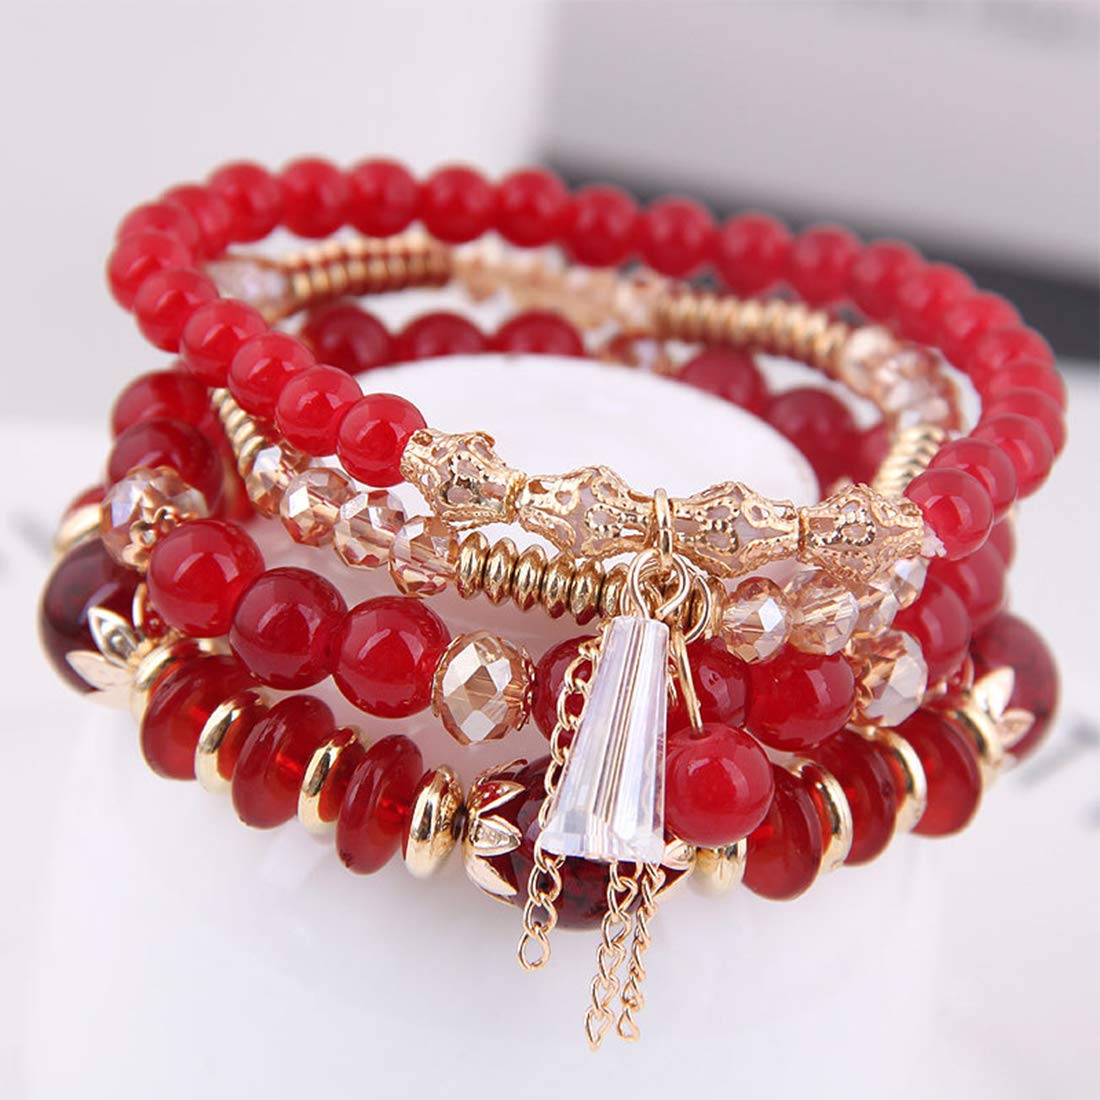 Yellow Chimes Stylish Bohemian Red Natural Stones Beaded Multilayer Bracelet for Women and Girl's